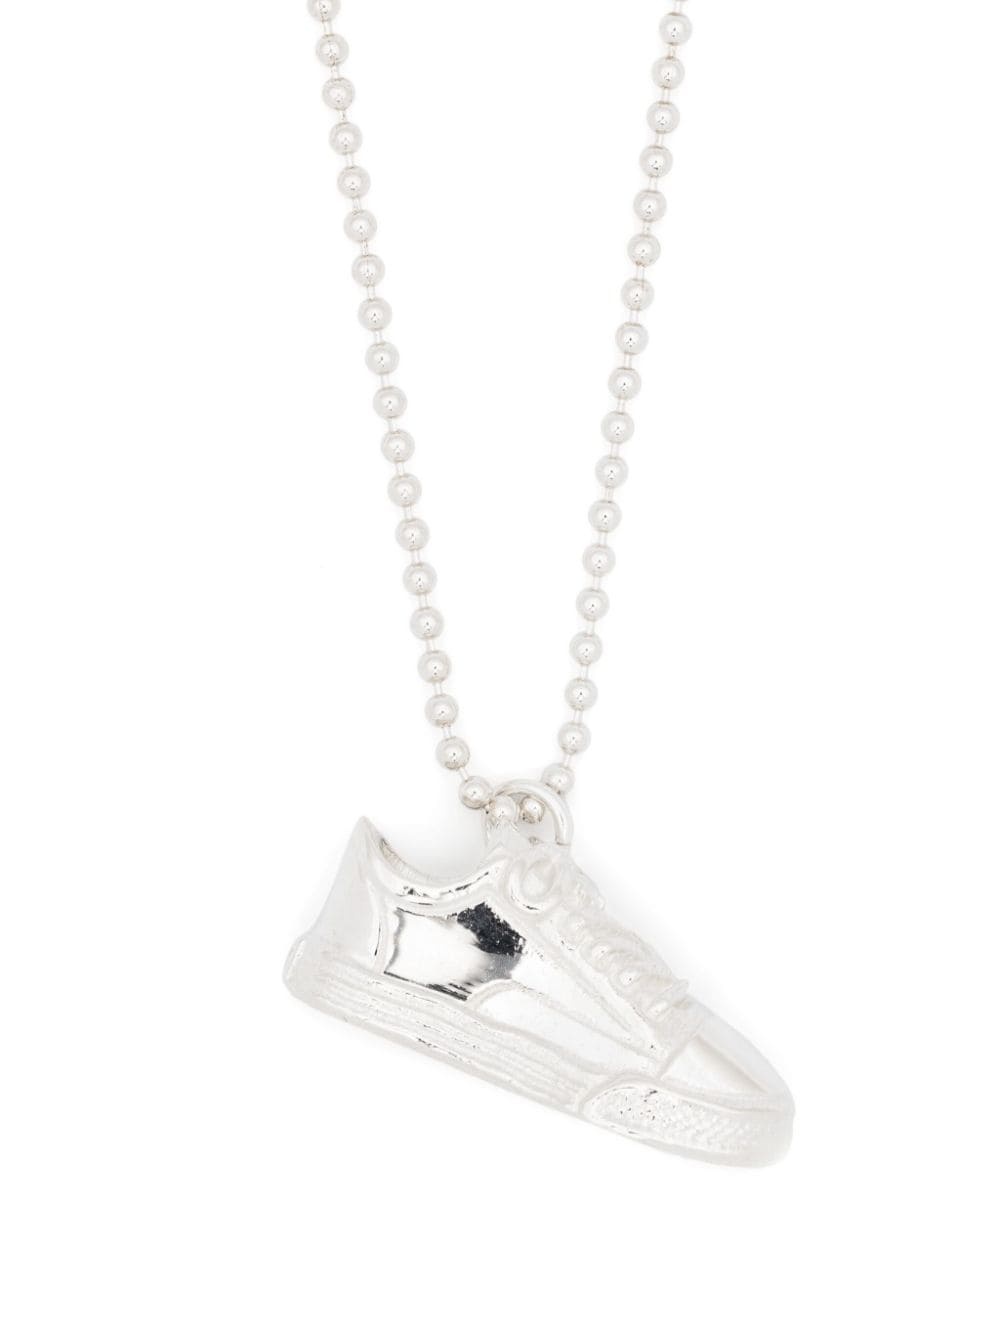 Sneaker ball-chain necklace - 1